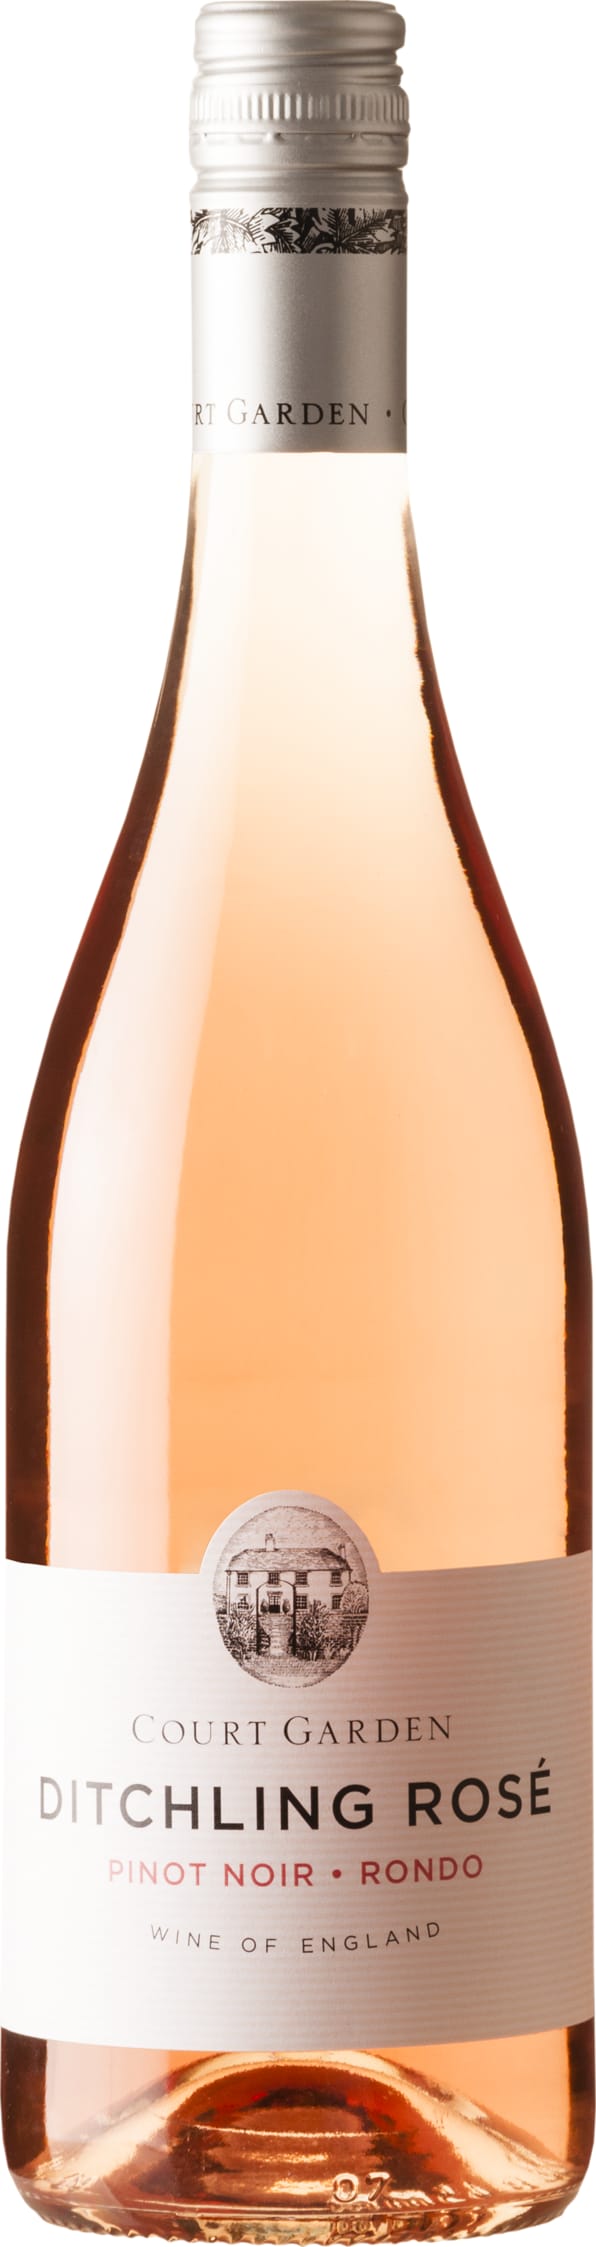 Ditchling Rose 21 Court Garden 75cl - Buy Ditchling Wines from GREAT WINES DIRECT wine shop